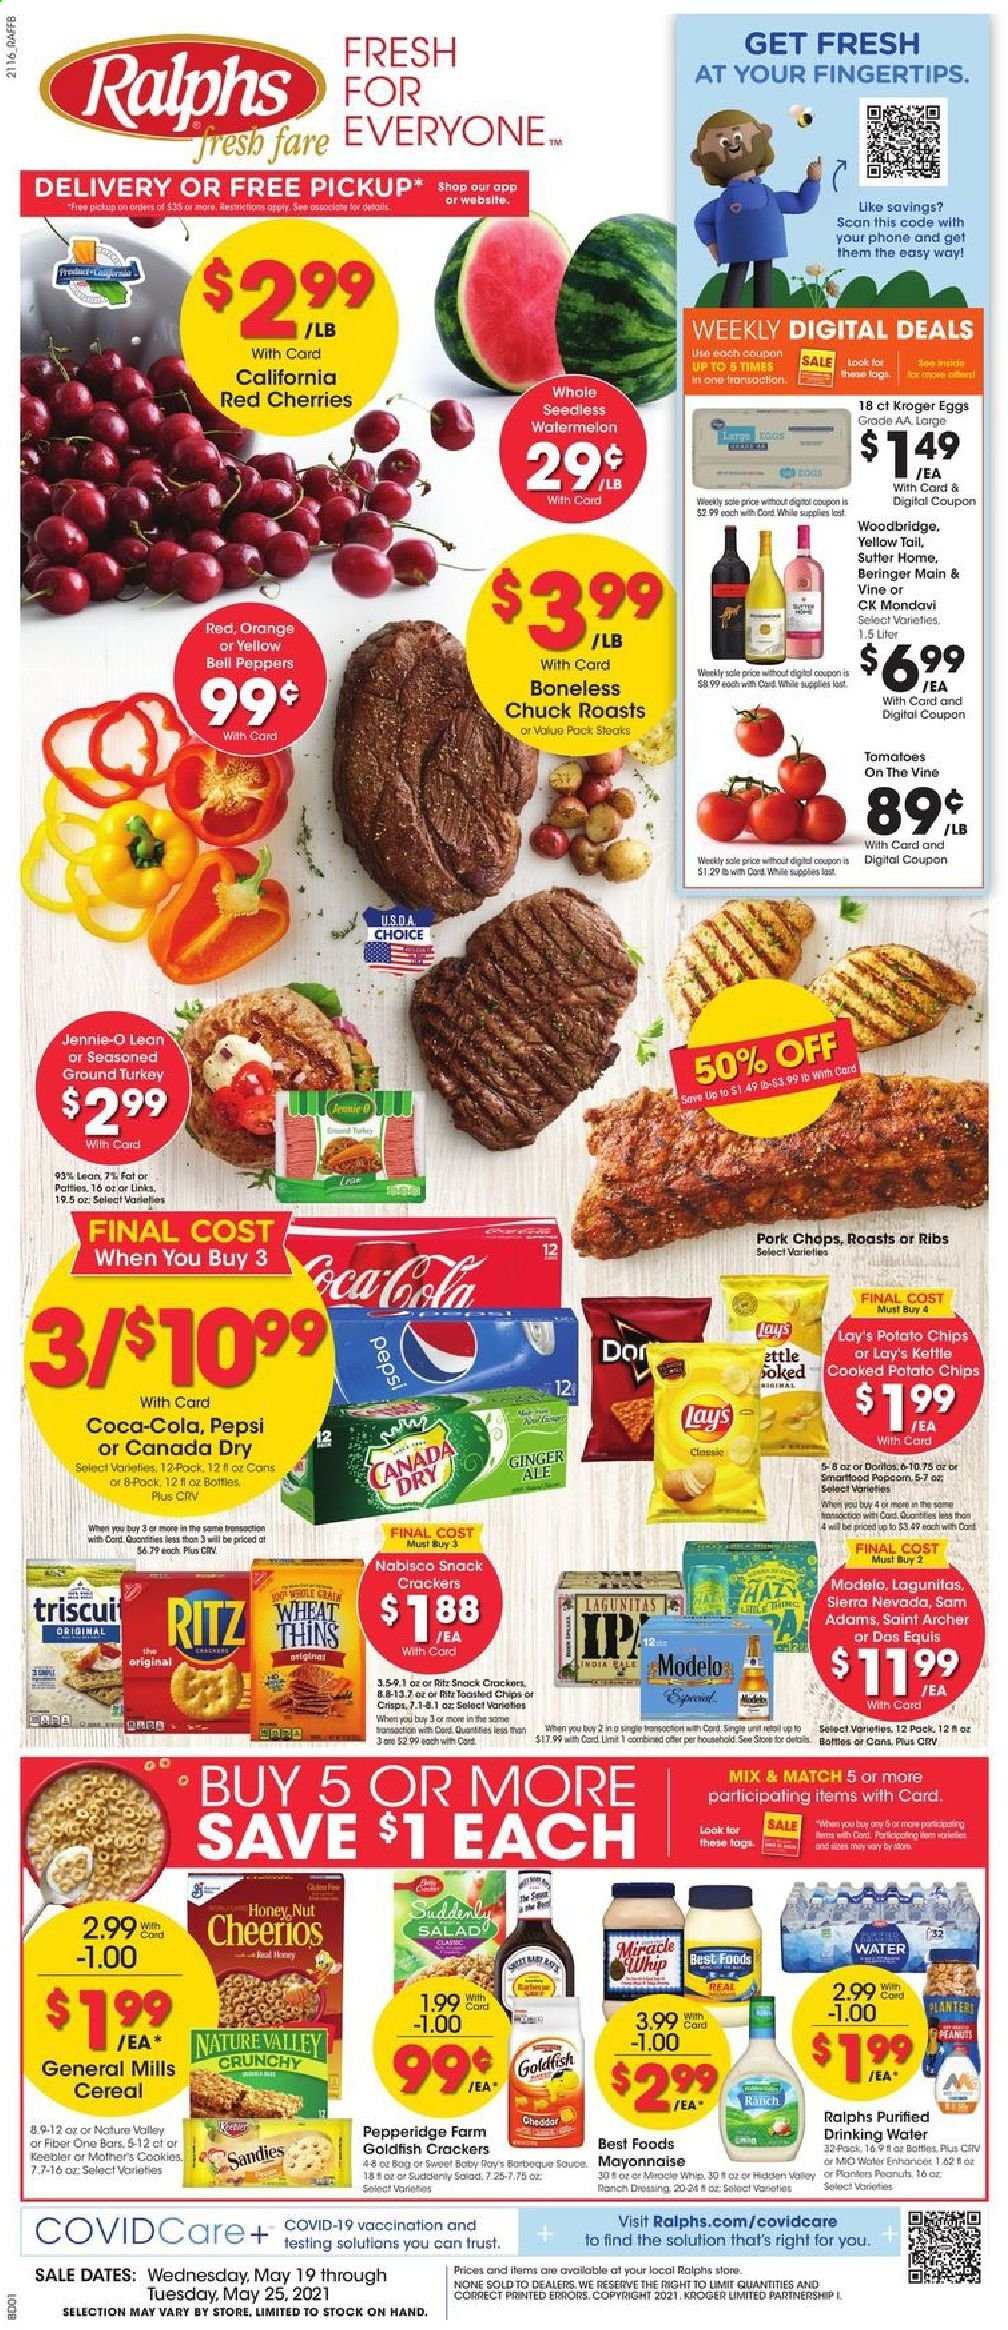 thumbnail - Ralphs Flyer - 05/19/2021 - 05/25/2021 - Sales products - bell peppers, ginger, tomatoes, salad, peppers, watermelon, cherries, oranges, eggs, mayonnaise, Miracle Whip, cookies, snack, crackers, Keebler, RITZ, potato chips, chips, Lay’s, Smartfood, Thins, Goldfish, cereals, Cheerios, Nature Valley, Fiber One, dressing, peanuts, Canada Dry, Coca-Cola, Pepsi, Woodbridge, beer, Dos Equis, Modelo, ground turkey, steak, pork chops, pork meat. Page 1.